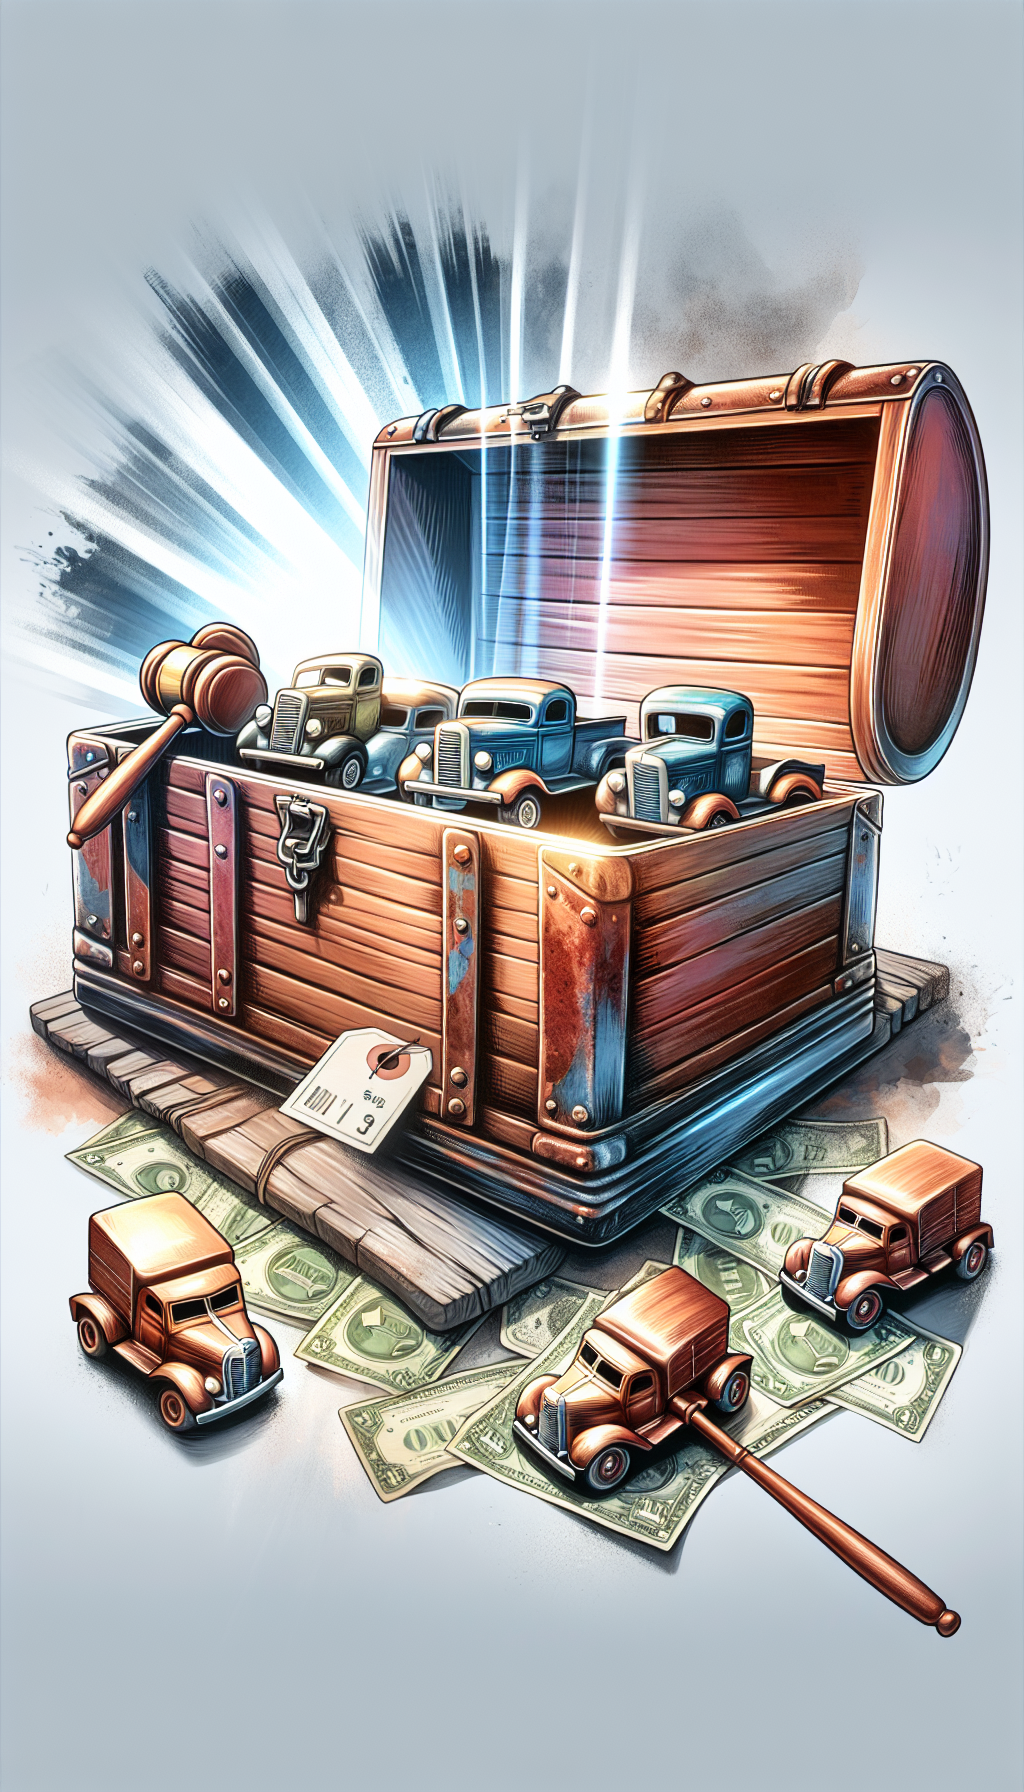 An aged, rusted Tonka toy chest, ajar with beams of light unveiling pristine, classic Tonka trucks inside, atop a pedestal of price tags and auction gavels. Styles vary randomly—from hyper-realistic trucks, a watercolor chest, to cartoonish currency, creating a visual timeline of the trucks' enduring value and nostalgia.